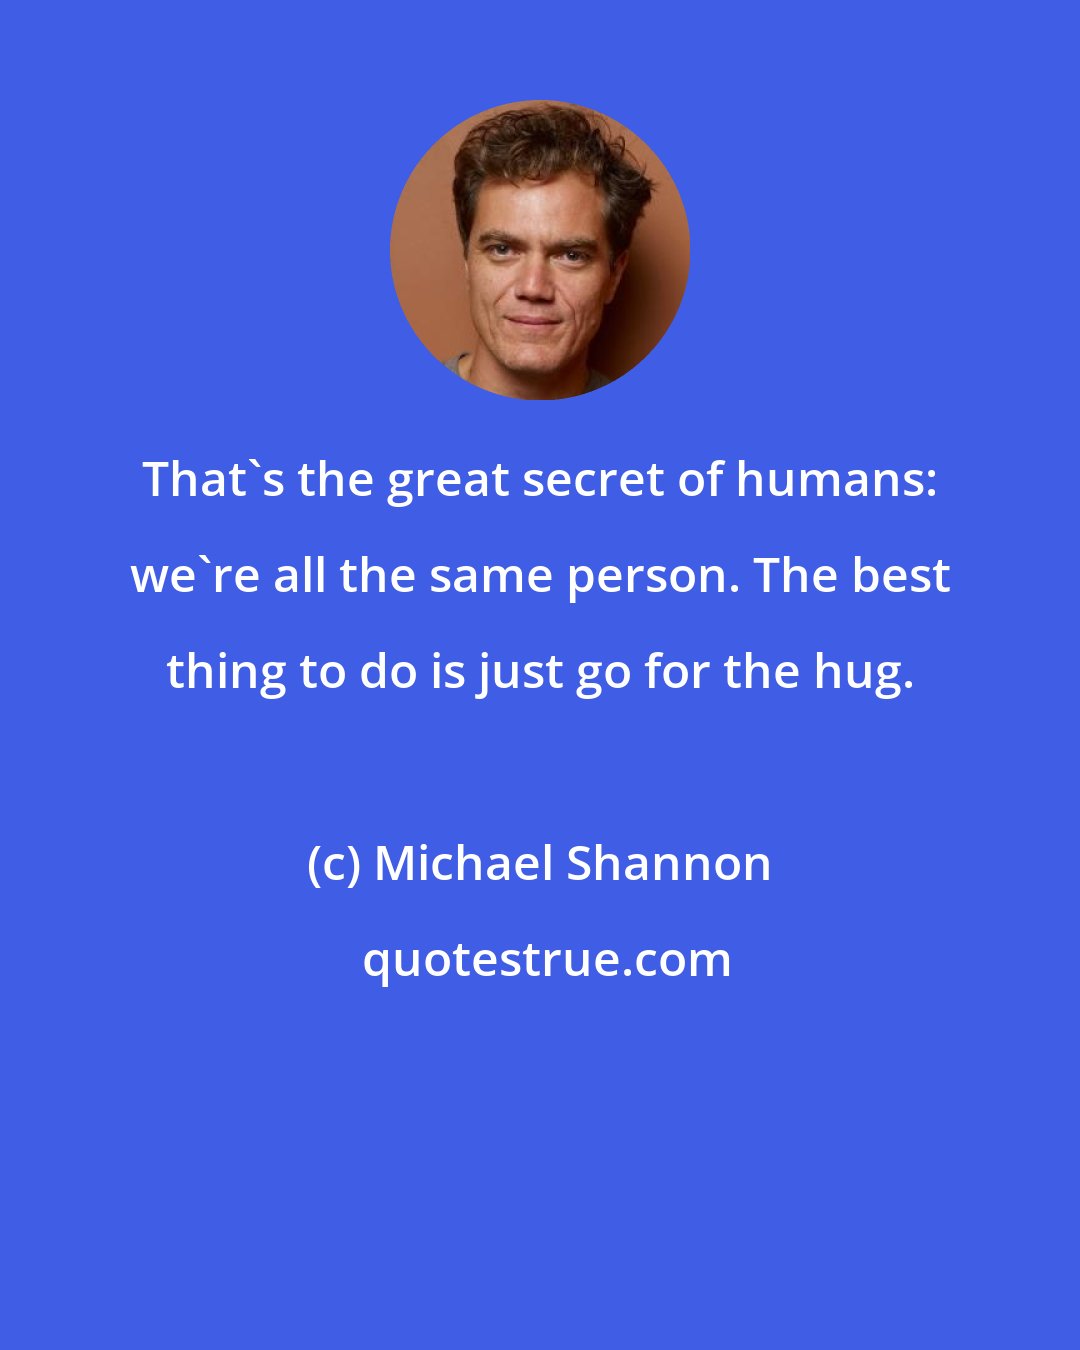 Michael Shannon: That's the great secret of humans: we're all the same person. The best thing to do is just go for the hug.